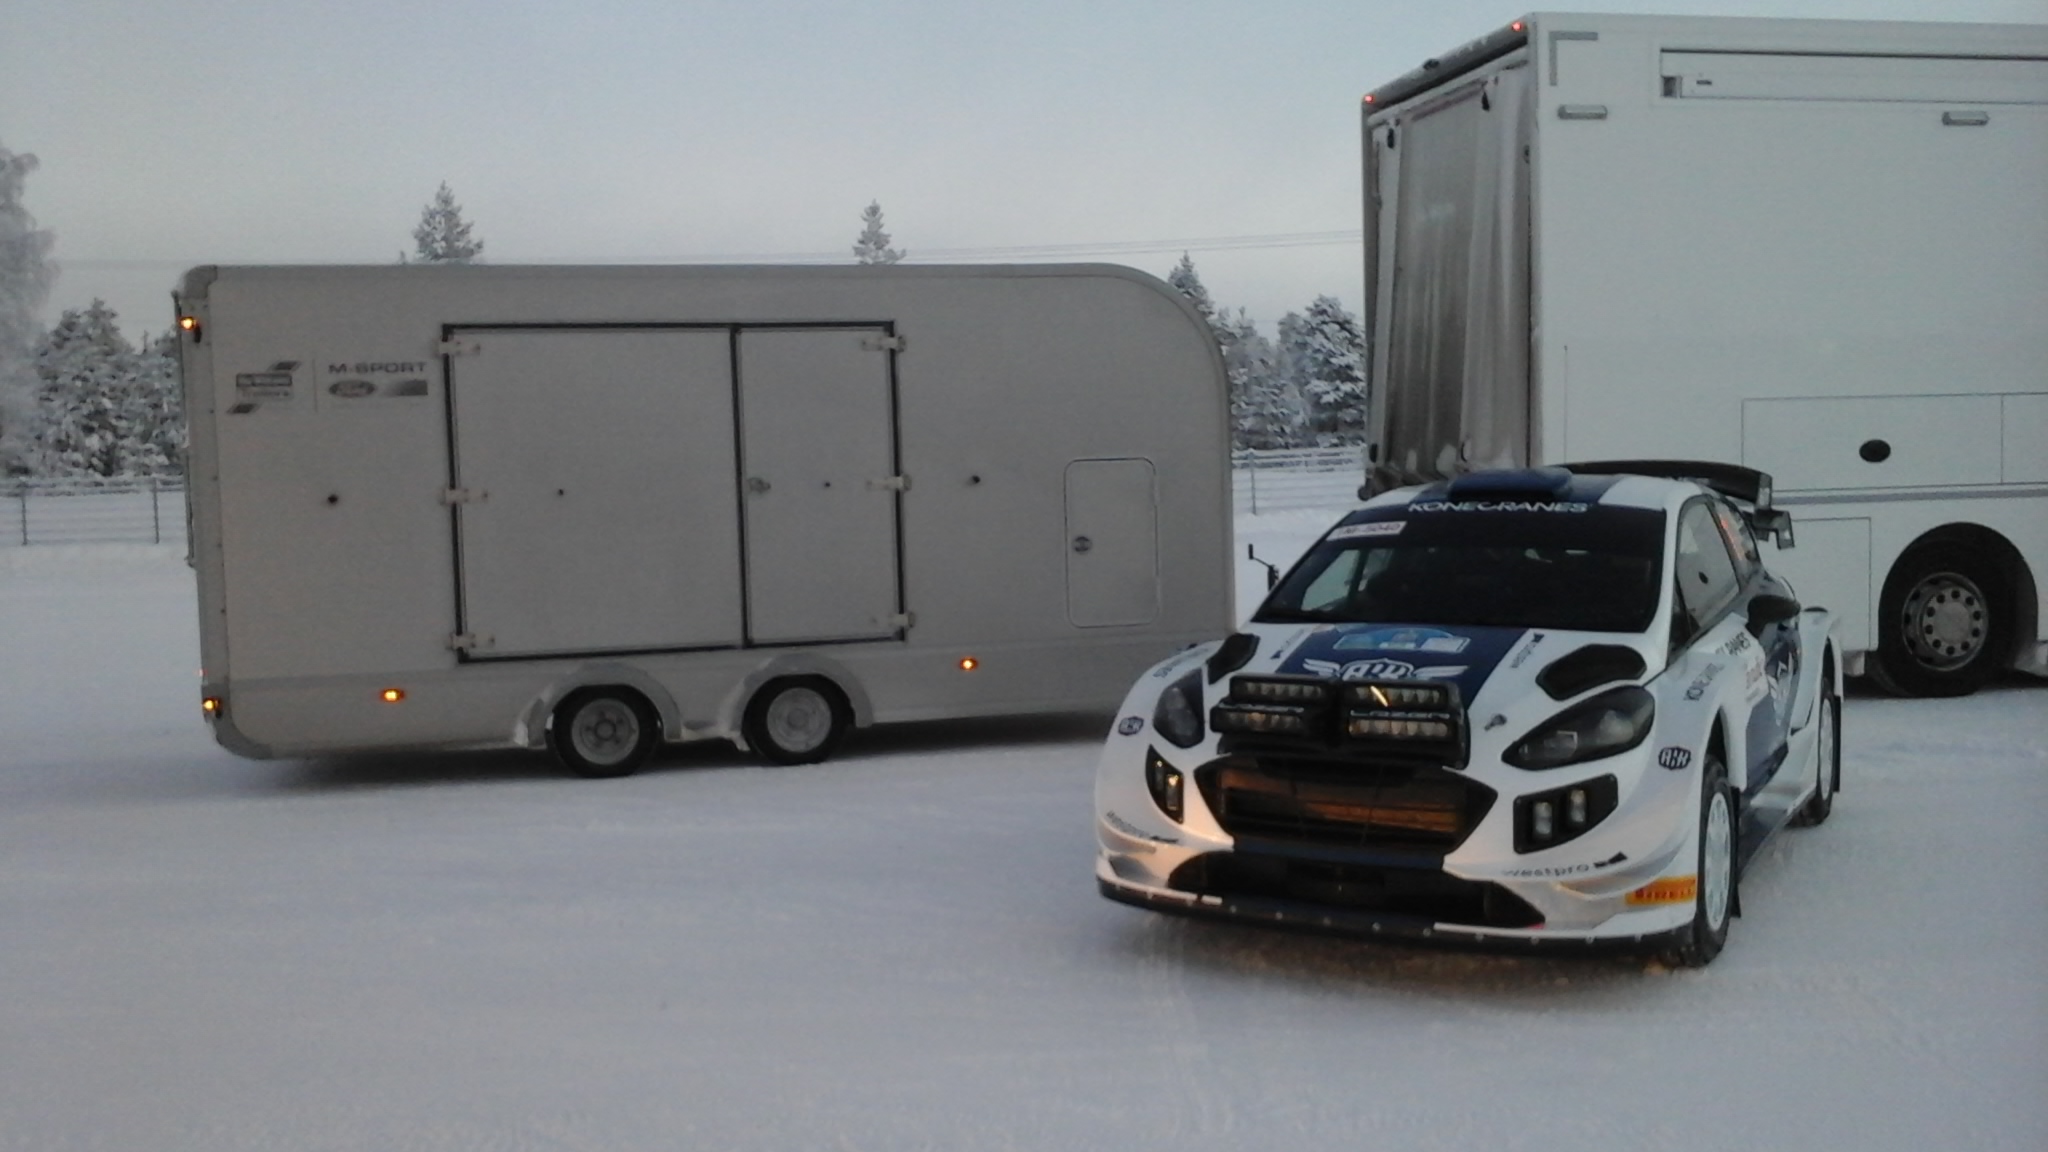 Trailer maker helps steer F1 star to success in Arctic rally 